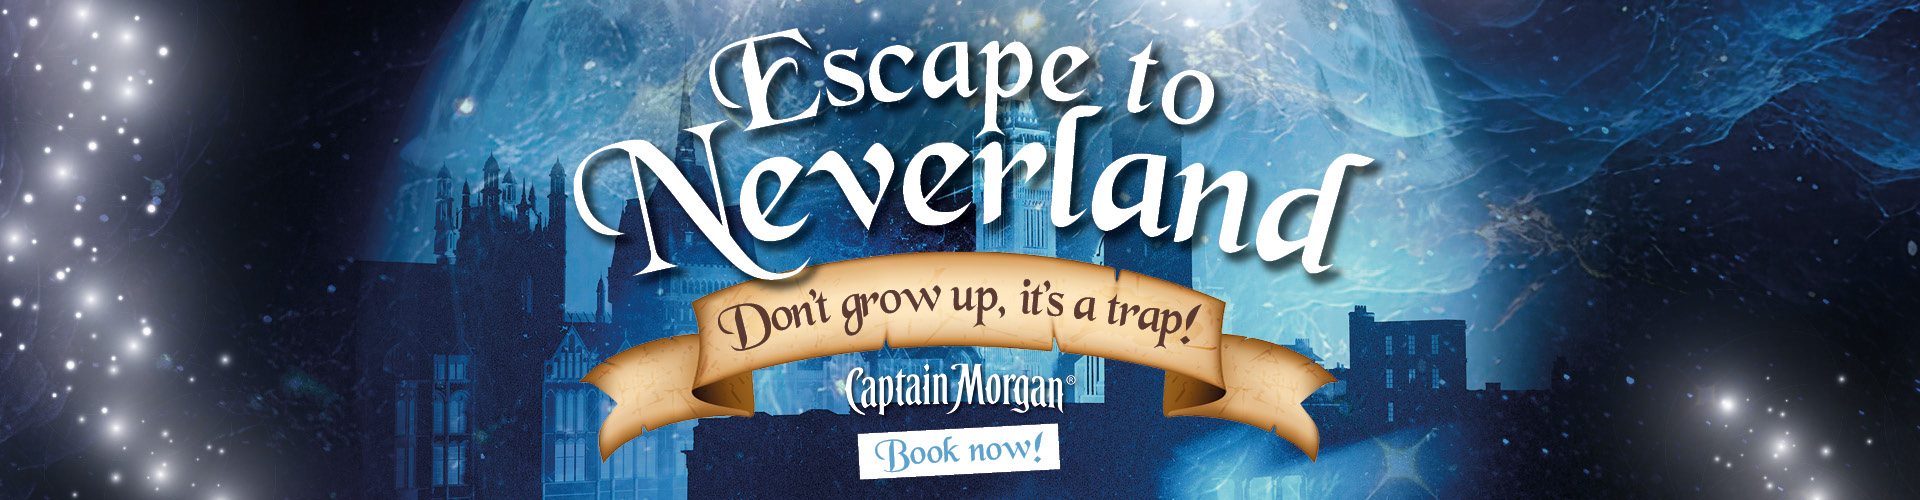 Escape to Neverland this NYE at Popworld Glasgow